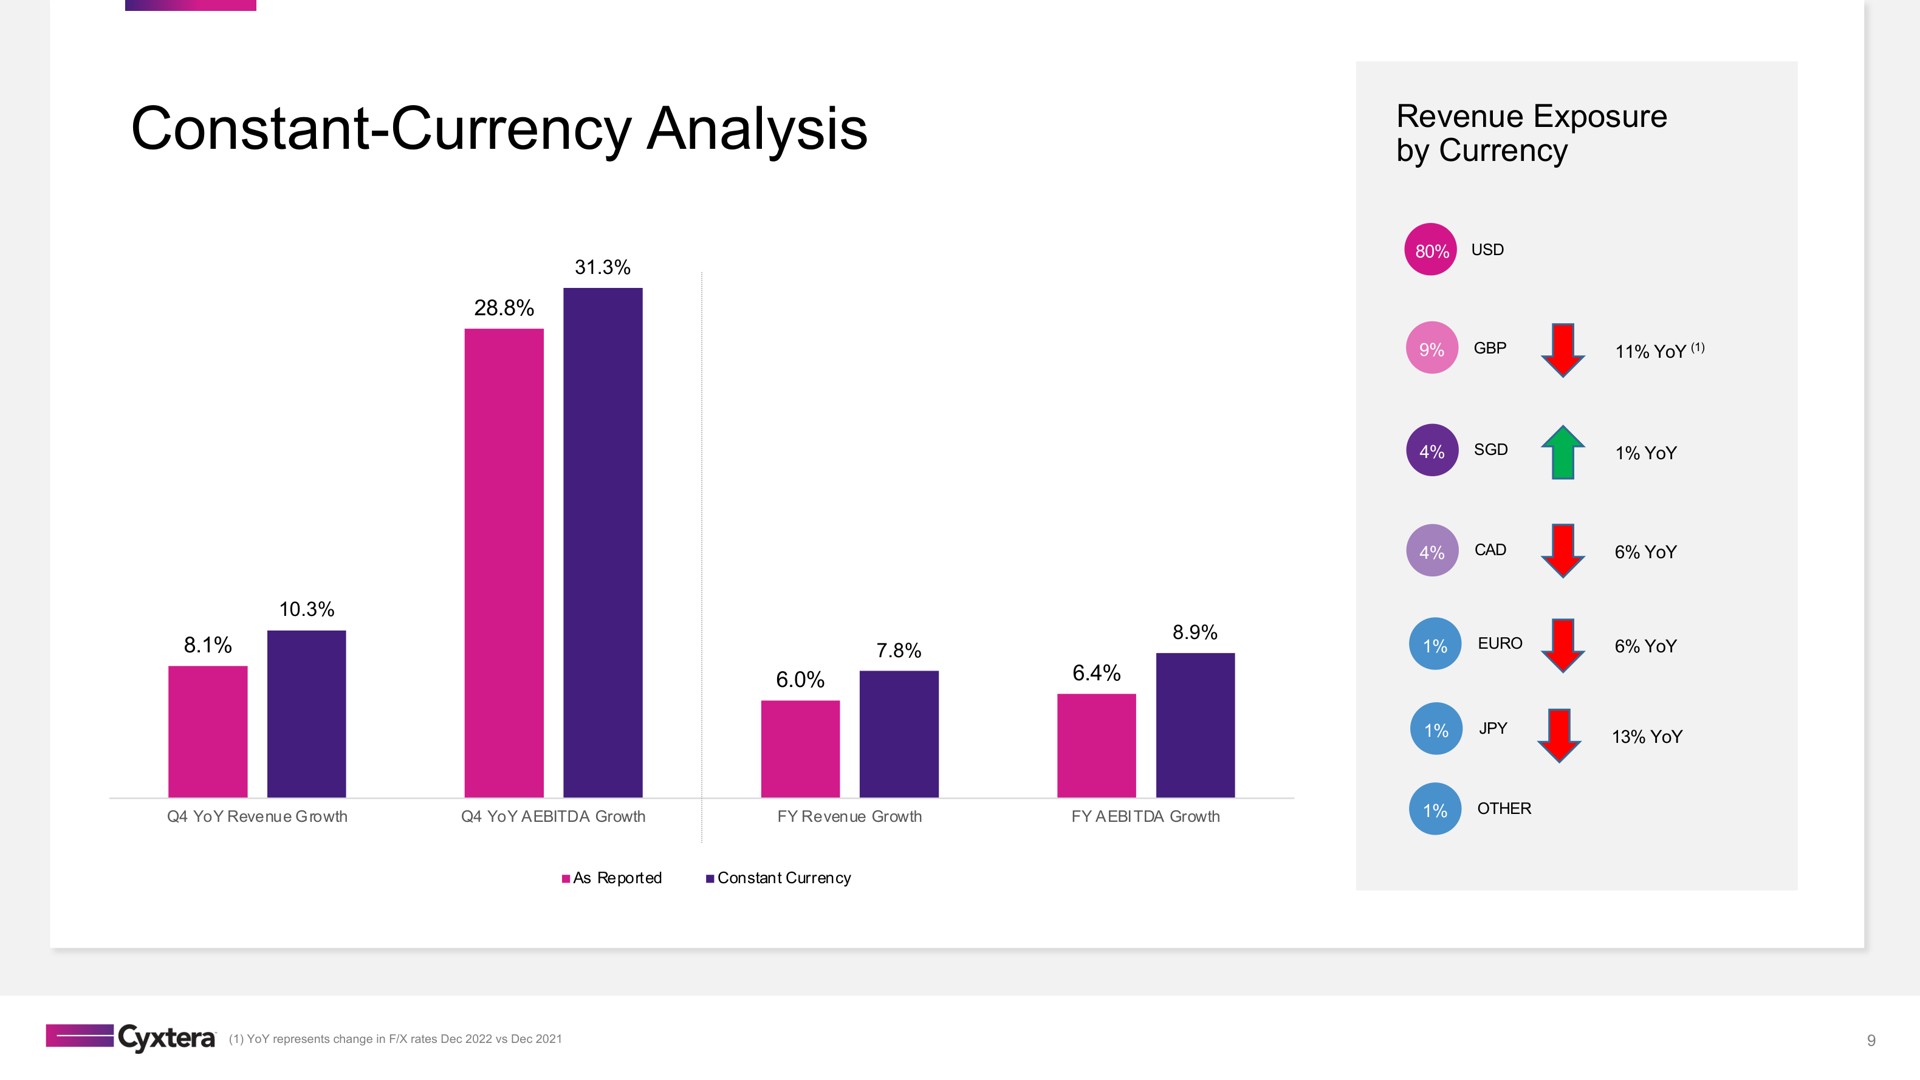 constant currency analysis revenue exposure by currency | Cyxtera